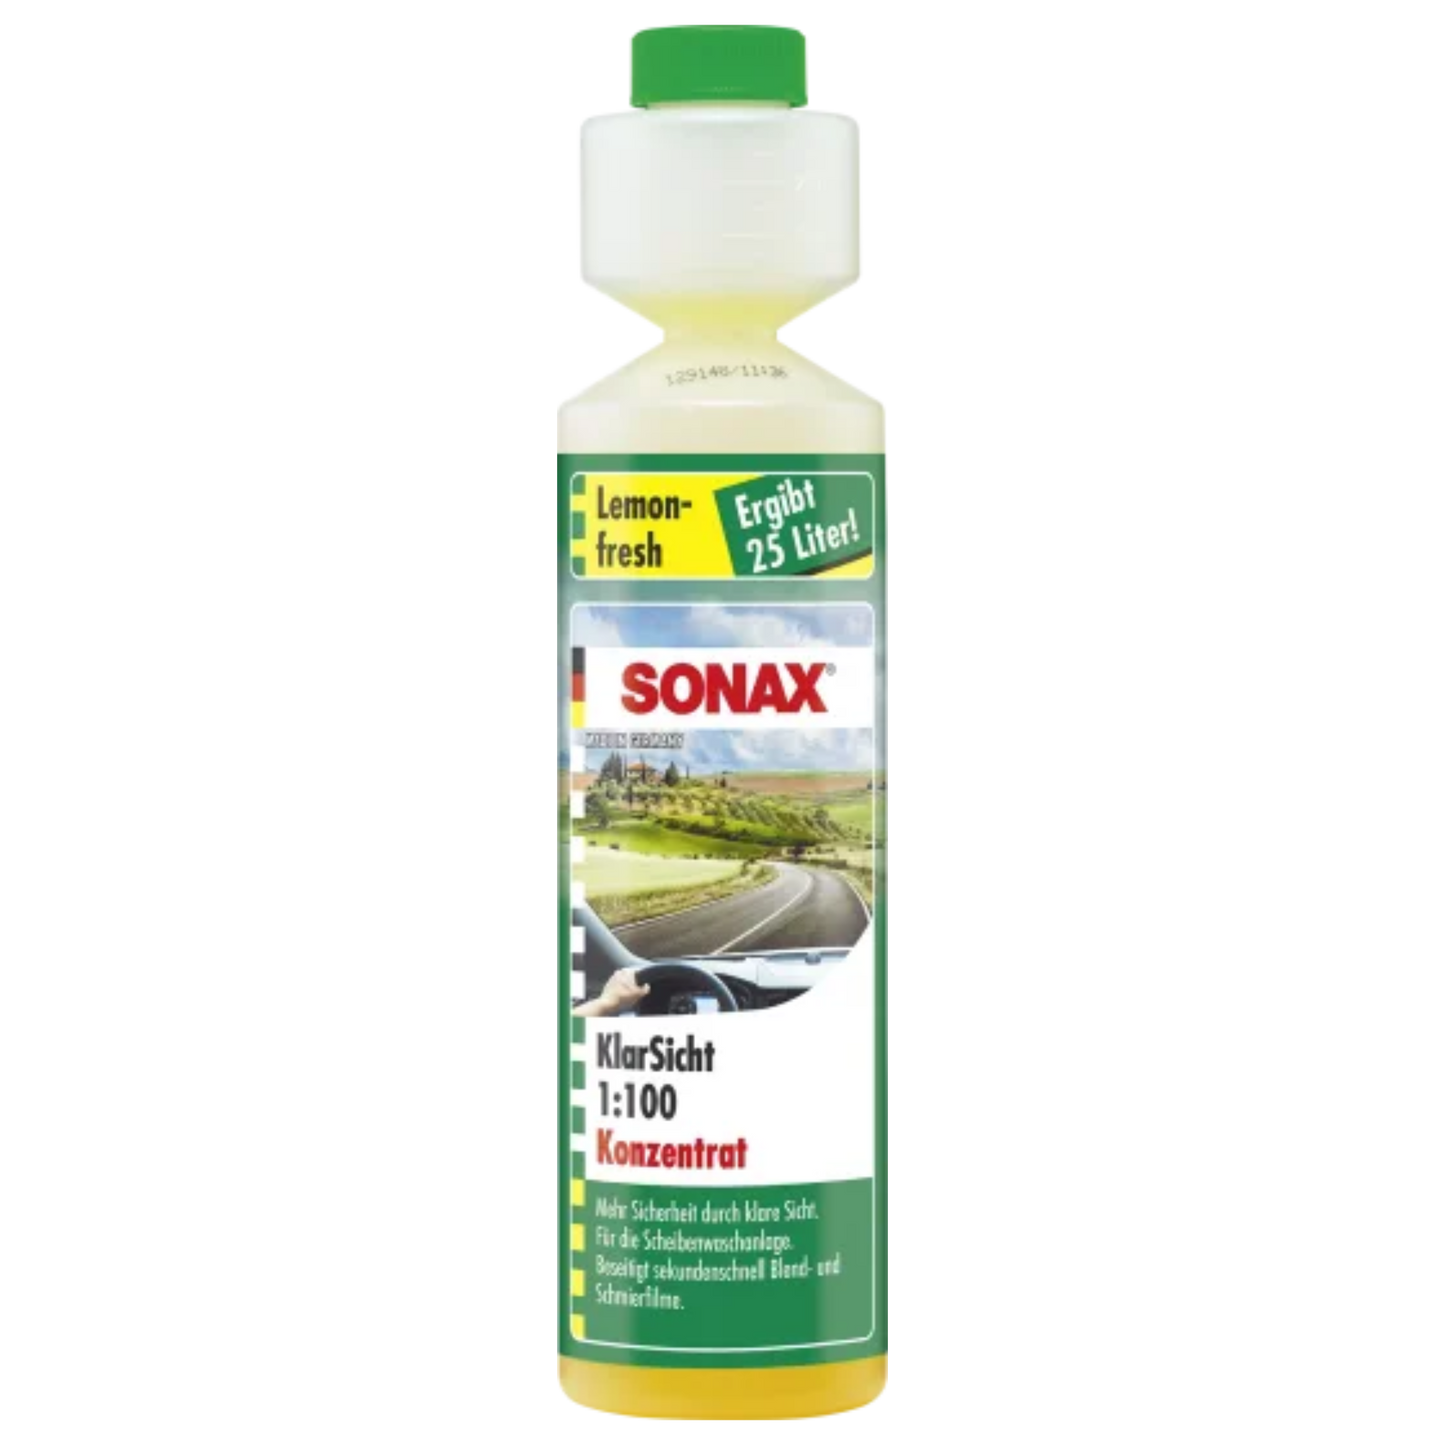 Koncentrat SONAX Clear Vision 1:100, 250ml